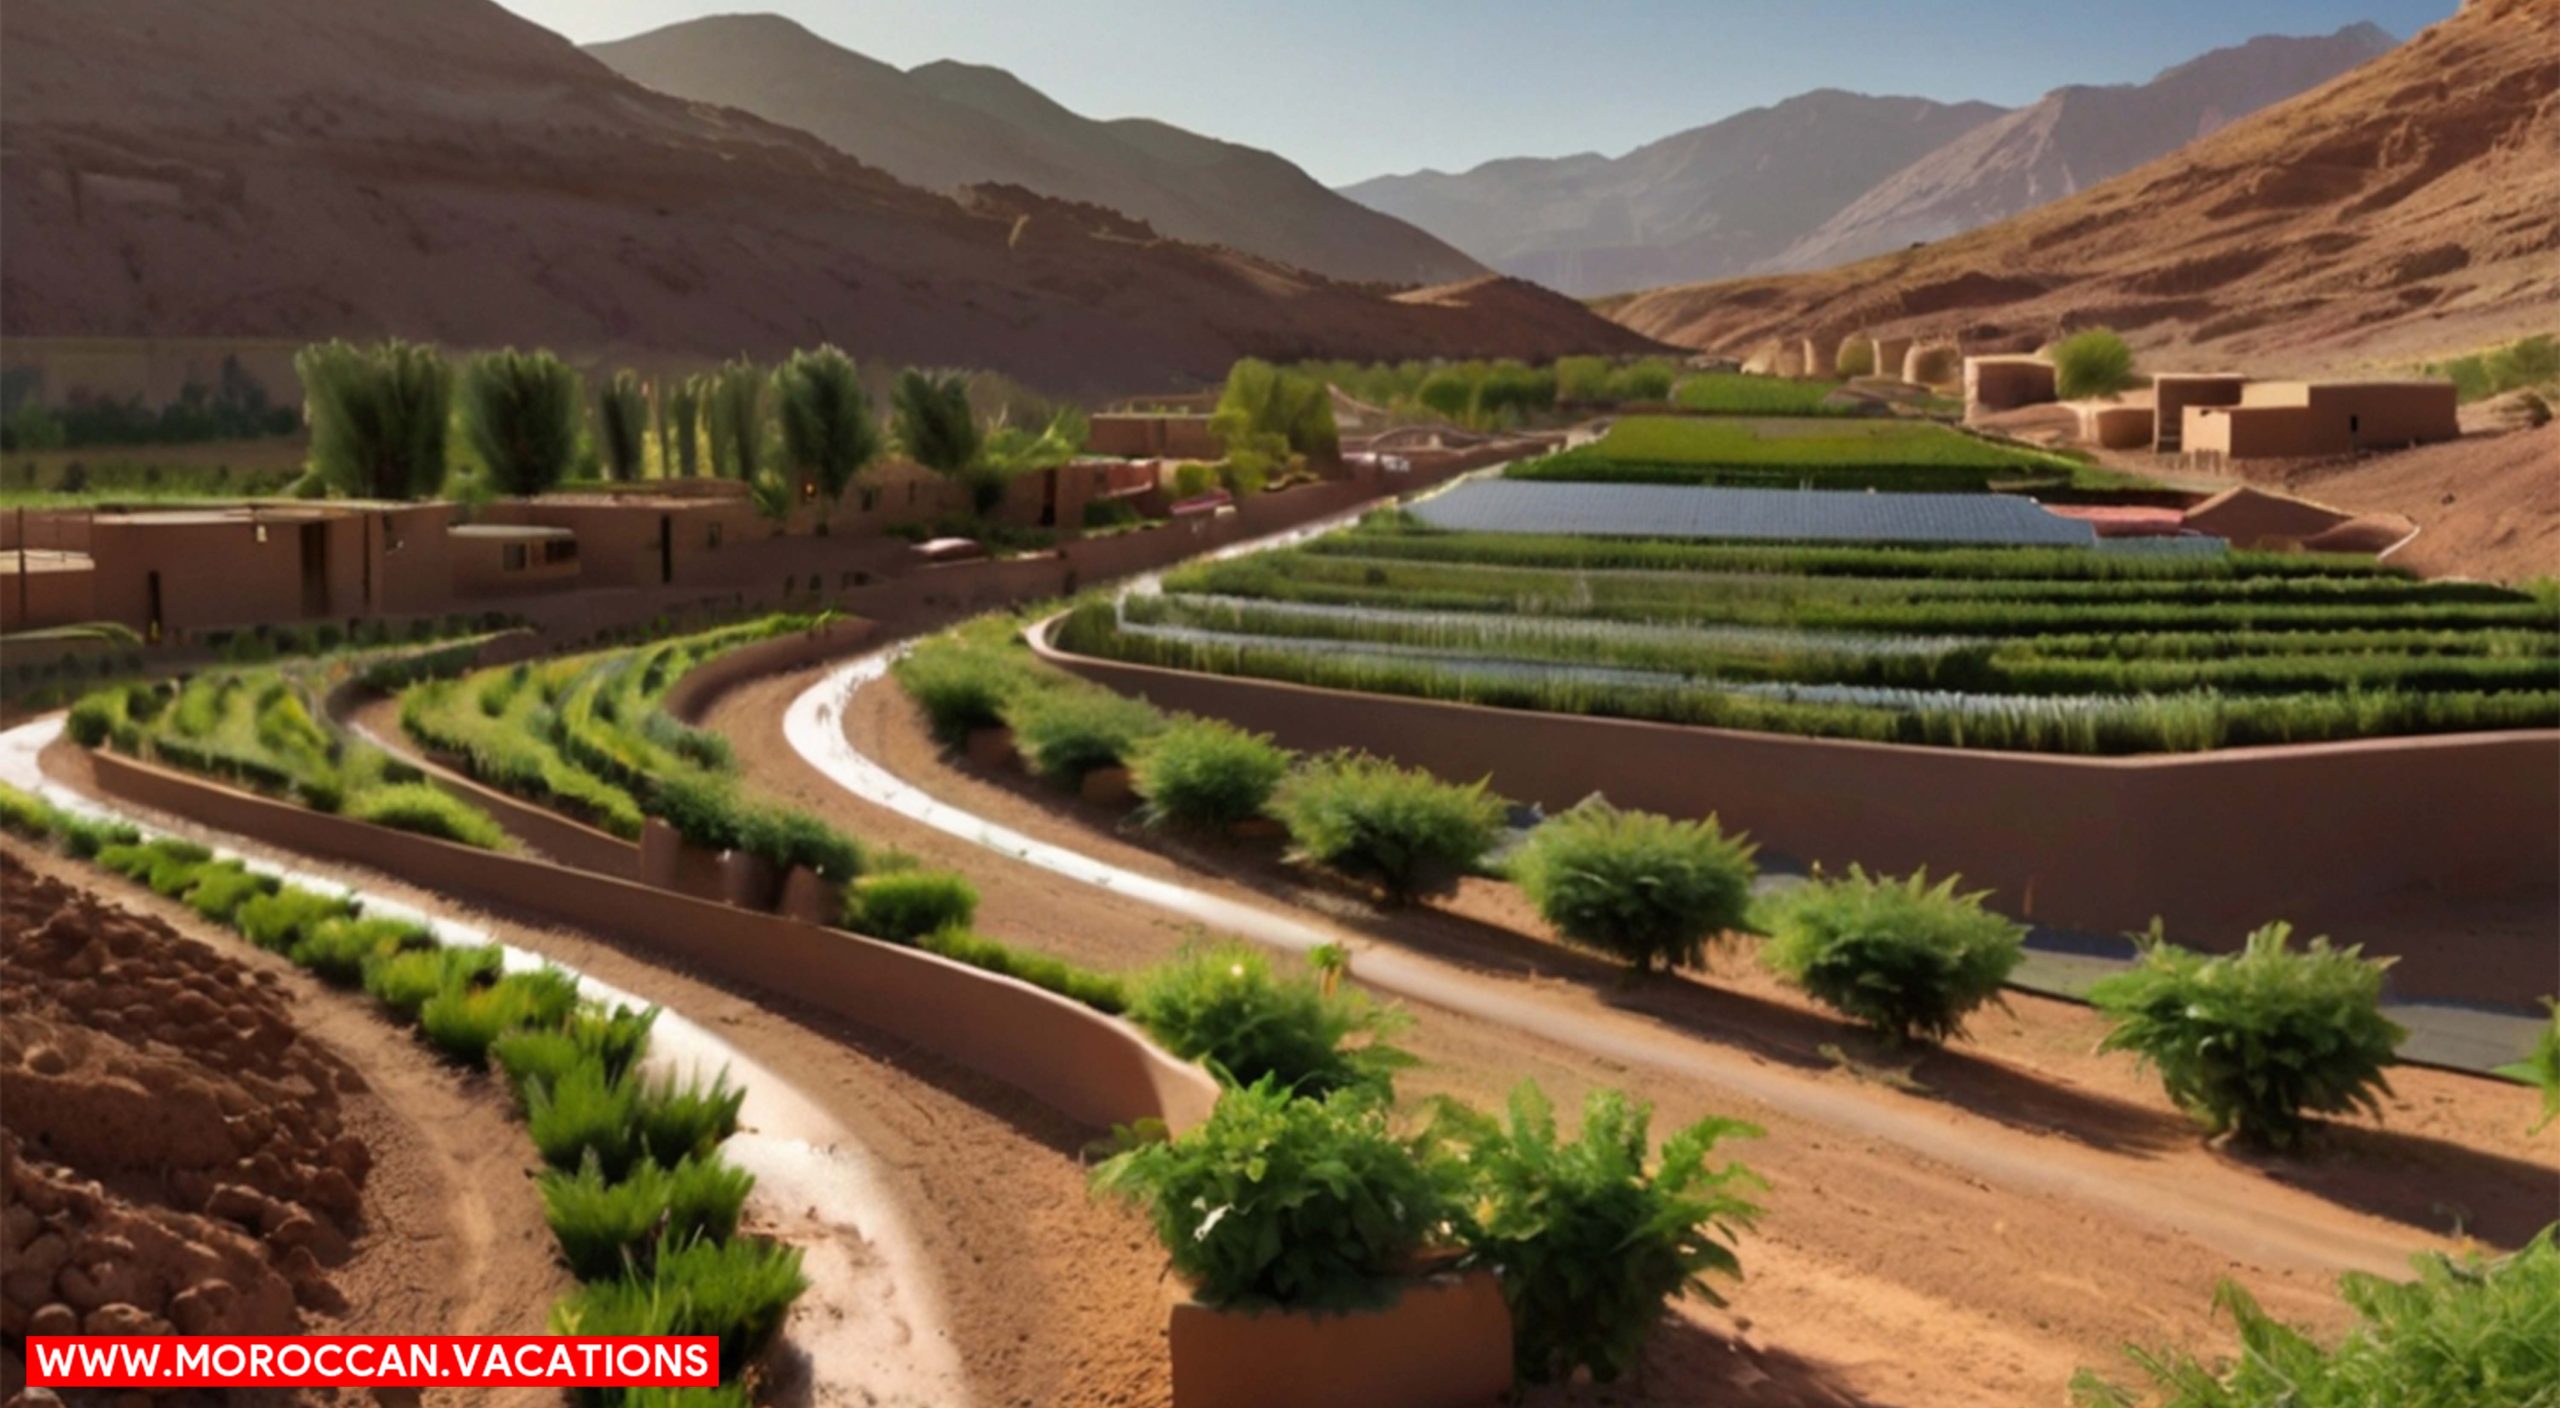 Dades valley in morocco with beautiful scenery.